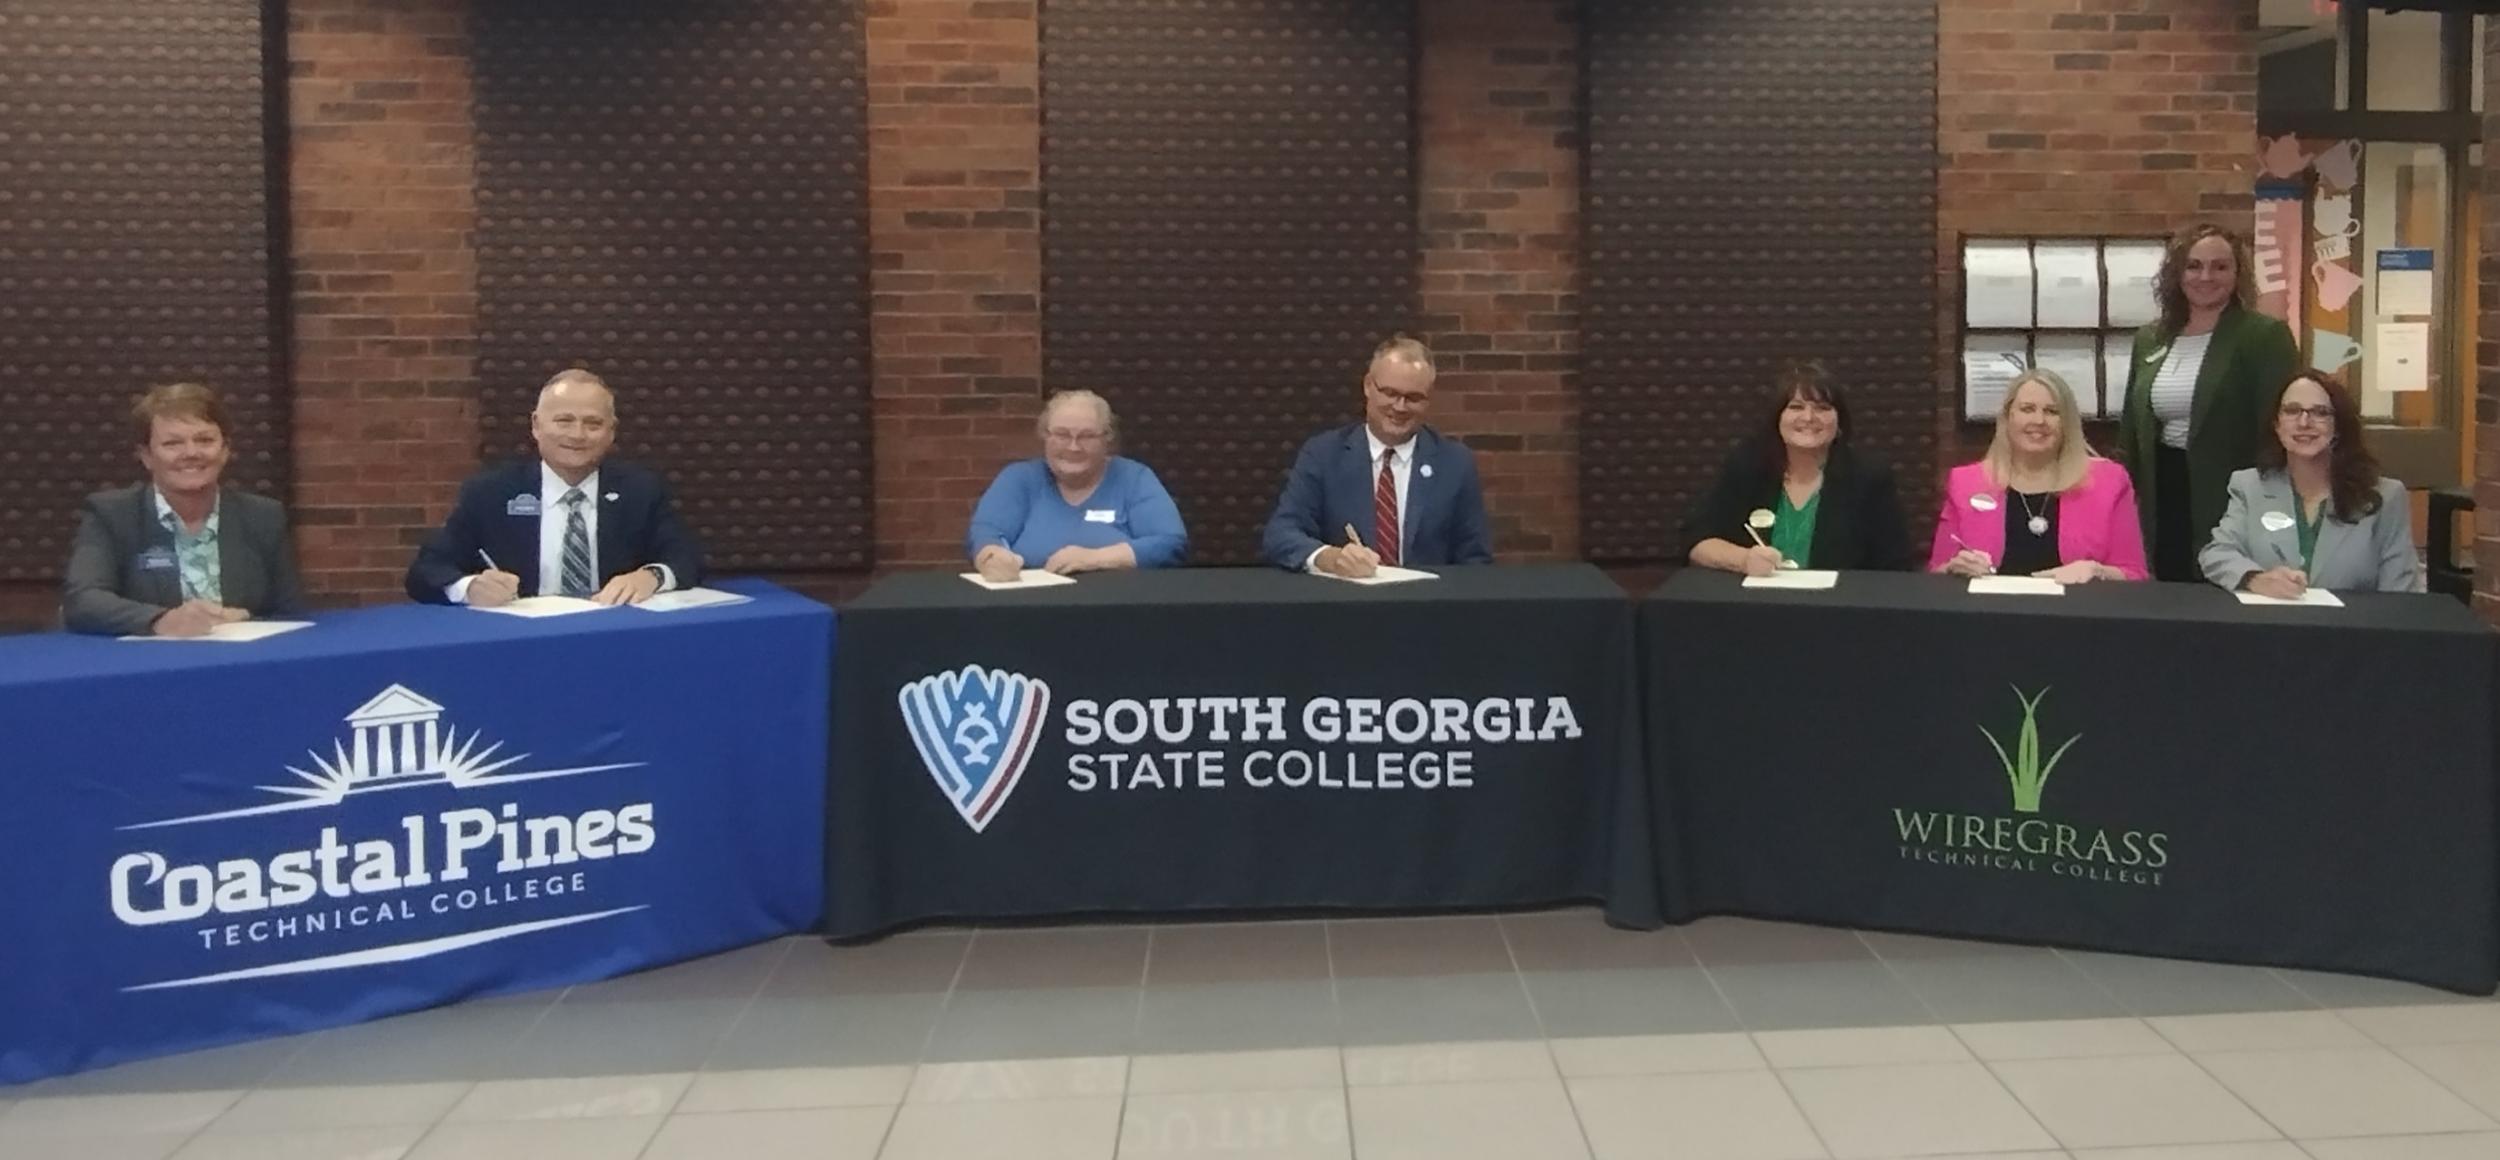 PHOTO: L-R: Amanda Morris, Executive Vice President and Vice President for Academic Affairs, and Lonnie Roberts, President (Coastal Pines Technical College); Sara Selby, Interim Vice President for Academic and Student Affairs, and Dr. Greg Tanner, Interim President (South Georgia State College); DeAnnia Clements, President, April McDuffie, Executive Vice President for Academic Affairs, and Dr. Shannon McConico, Vice President for Enrollment Management (Wiregrass Technical College) and standing Dr. Jammie Wilbanks (Senior Institutional Research and Planning Analyst).